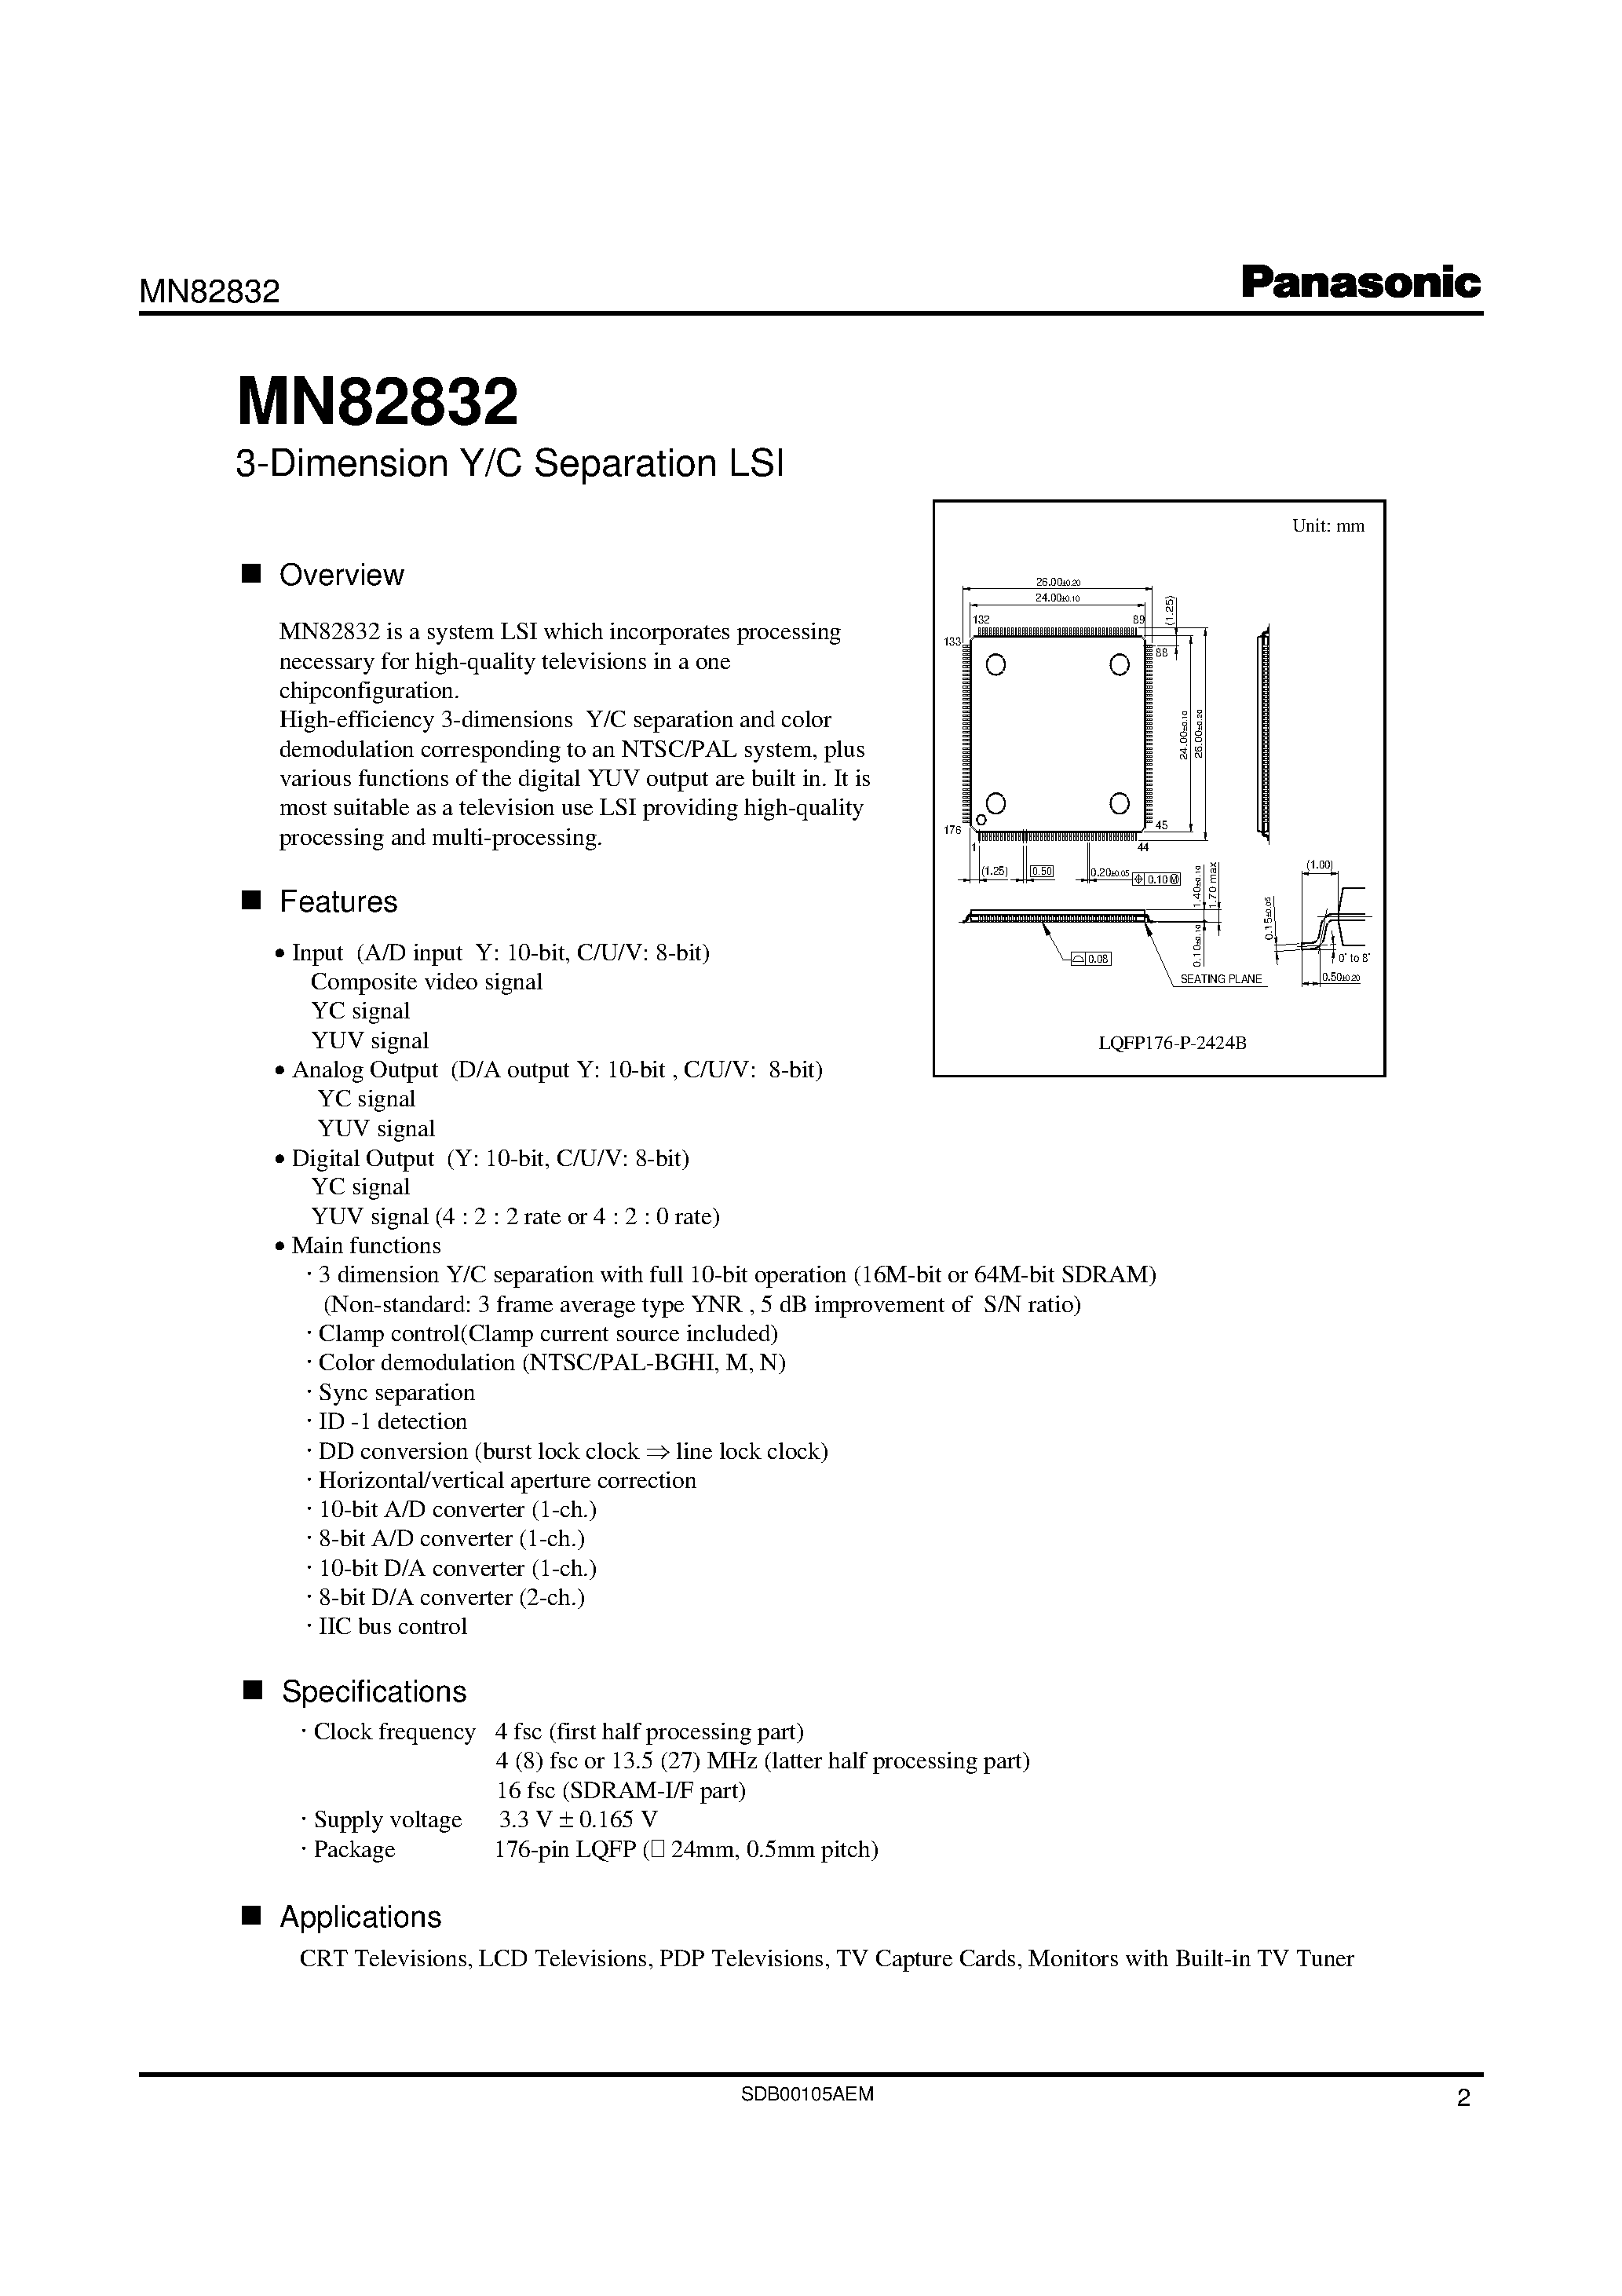 Datasheet MN82832 - 3-Dimension Y/C Separation LSI page 2